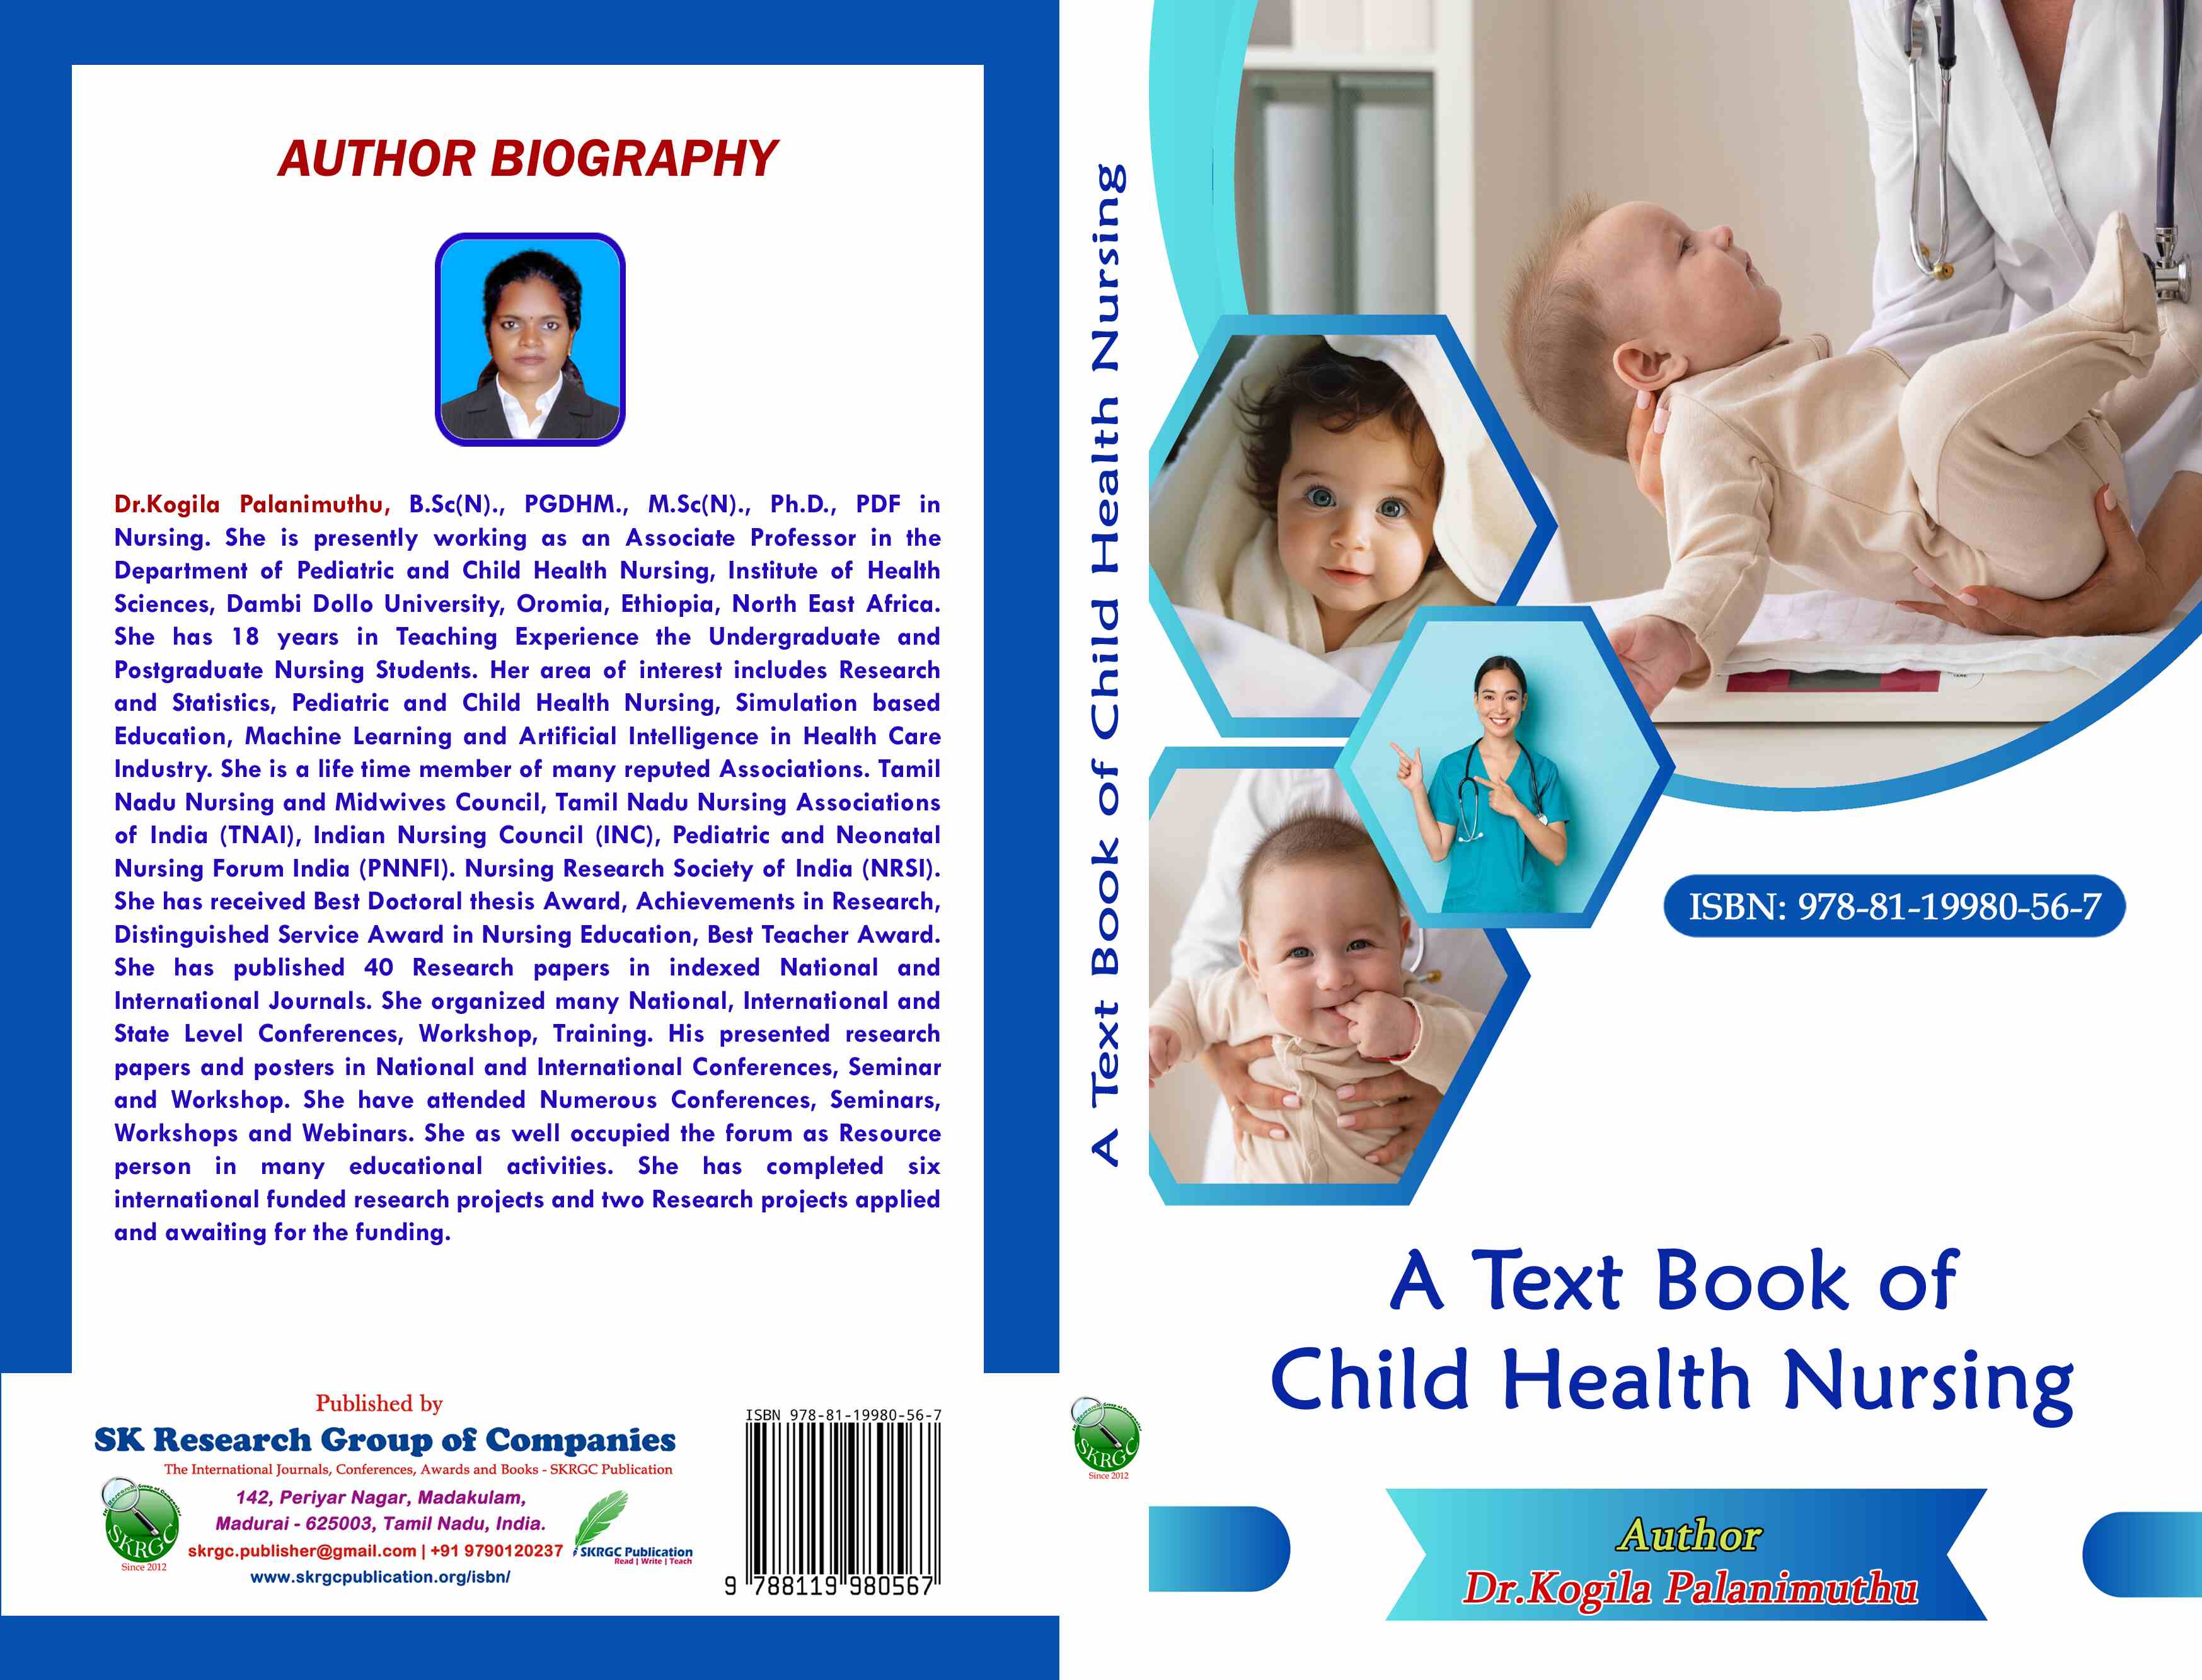 A Text Book of Child Health Nursing